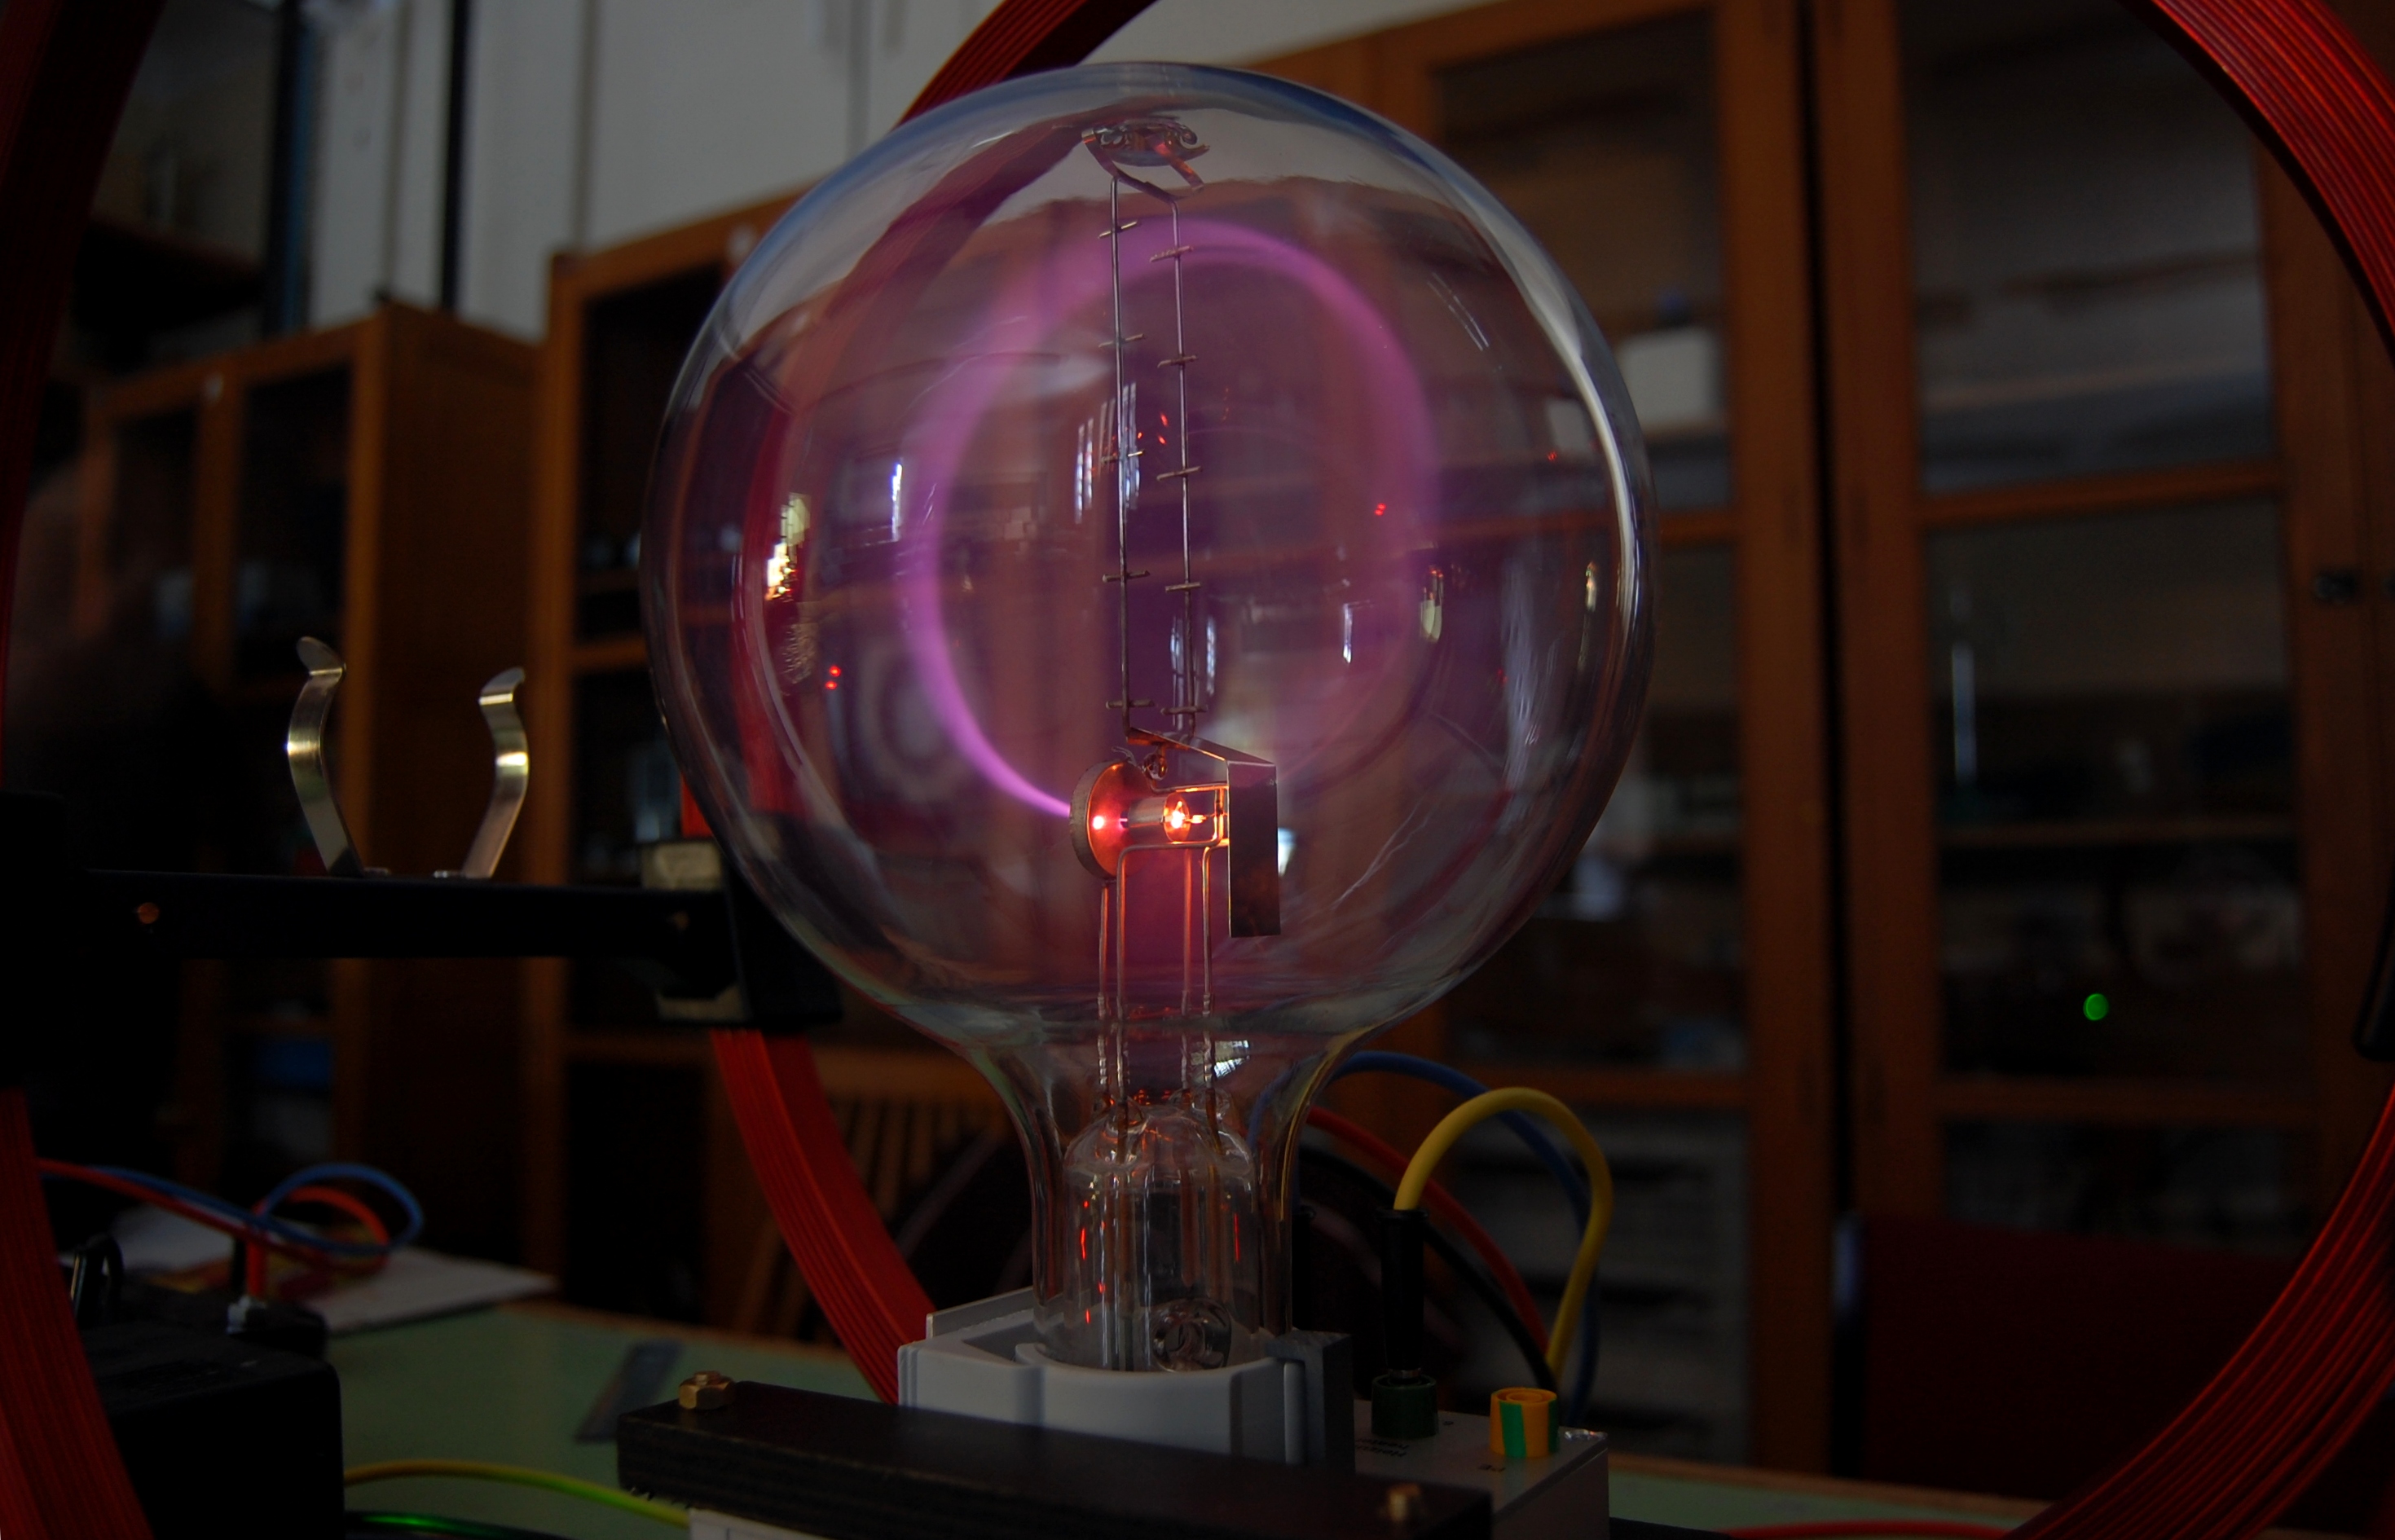 A vacuum bulb apparatus containing a jet of charged particles emitting a purple glow; the particles are seen to move in a circular trajectory due to an external electromagnetic field.